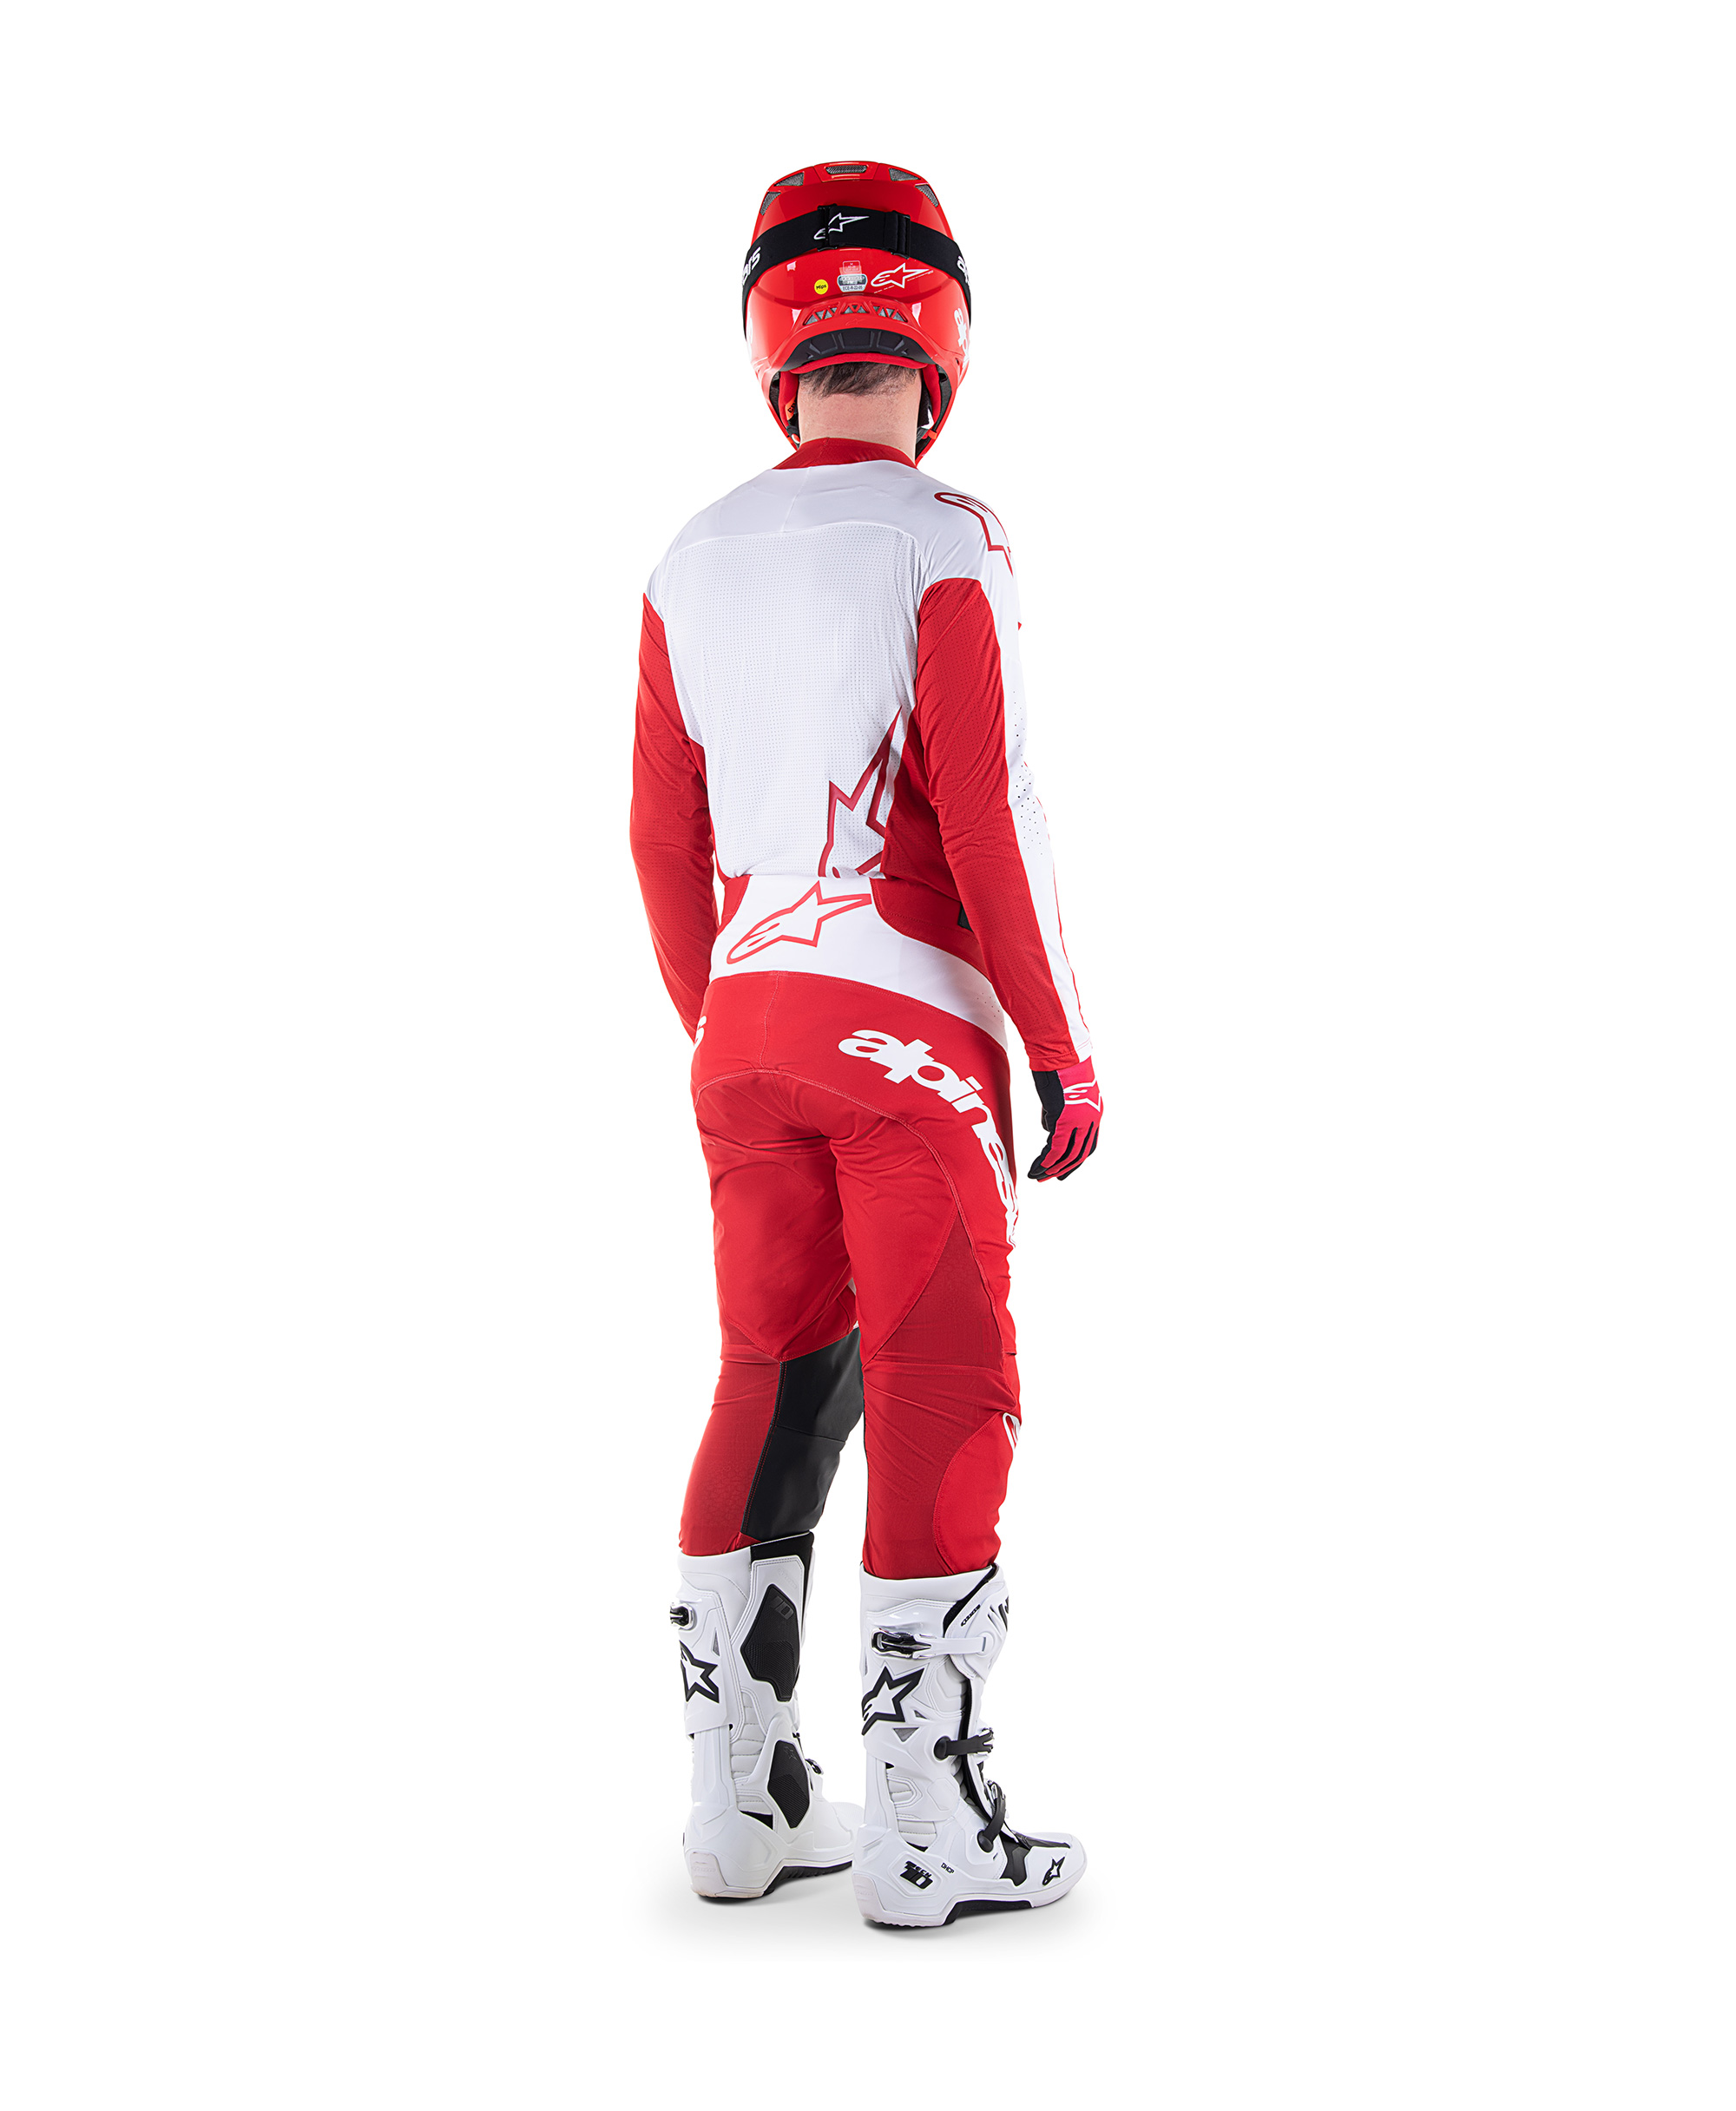 TECHSTAR ARCH JERSEY MARS RED WHITE